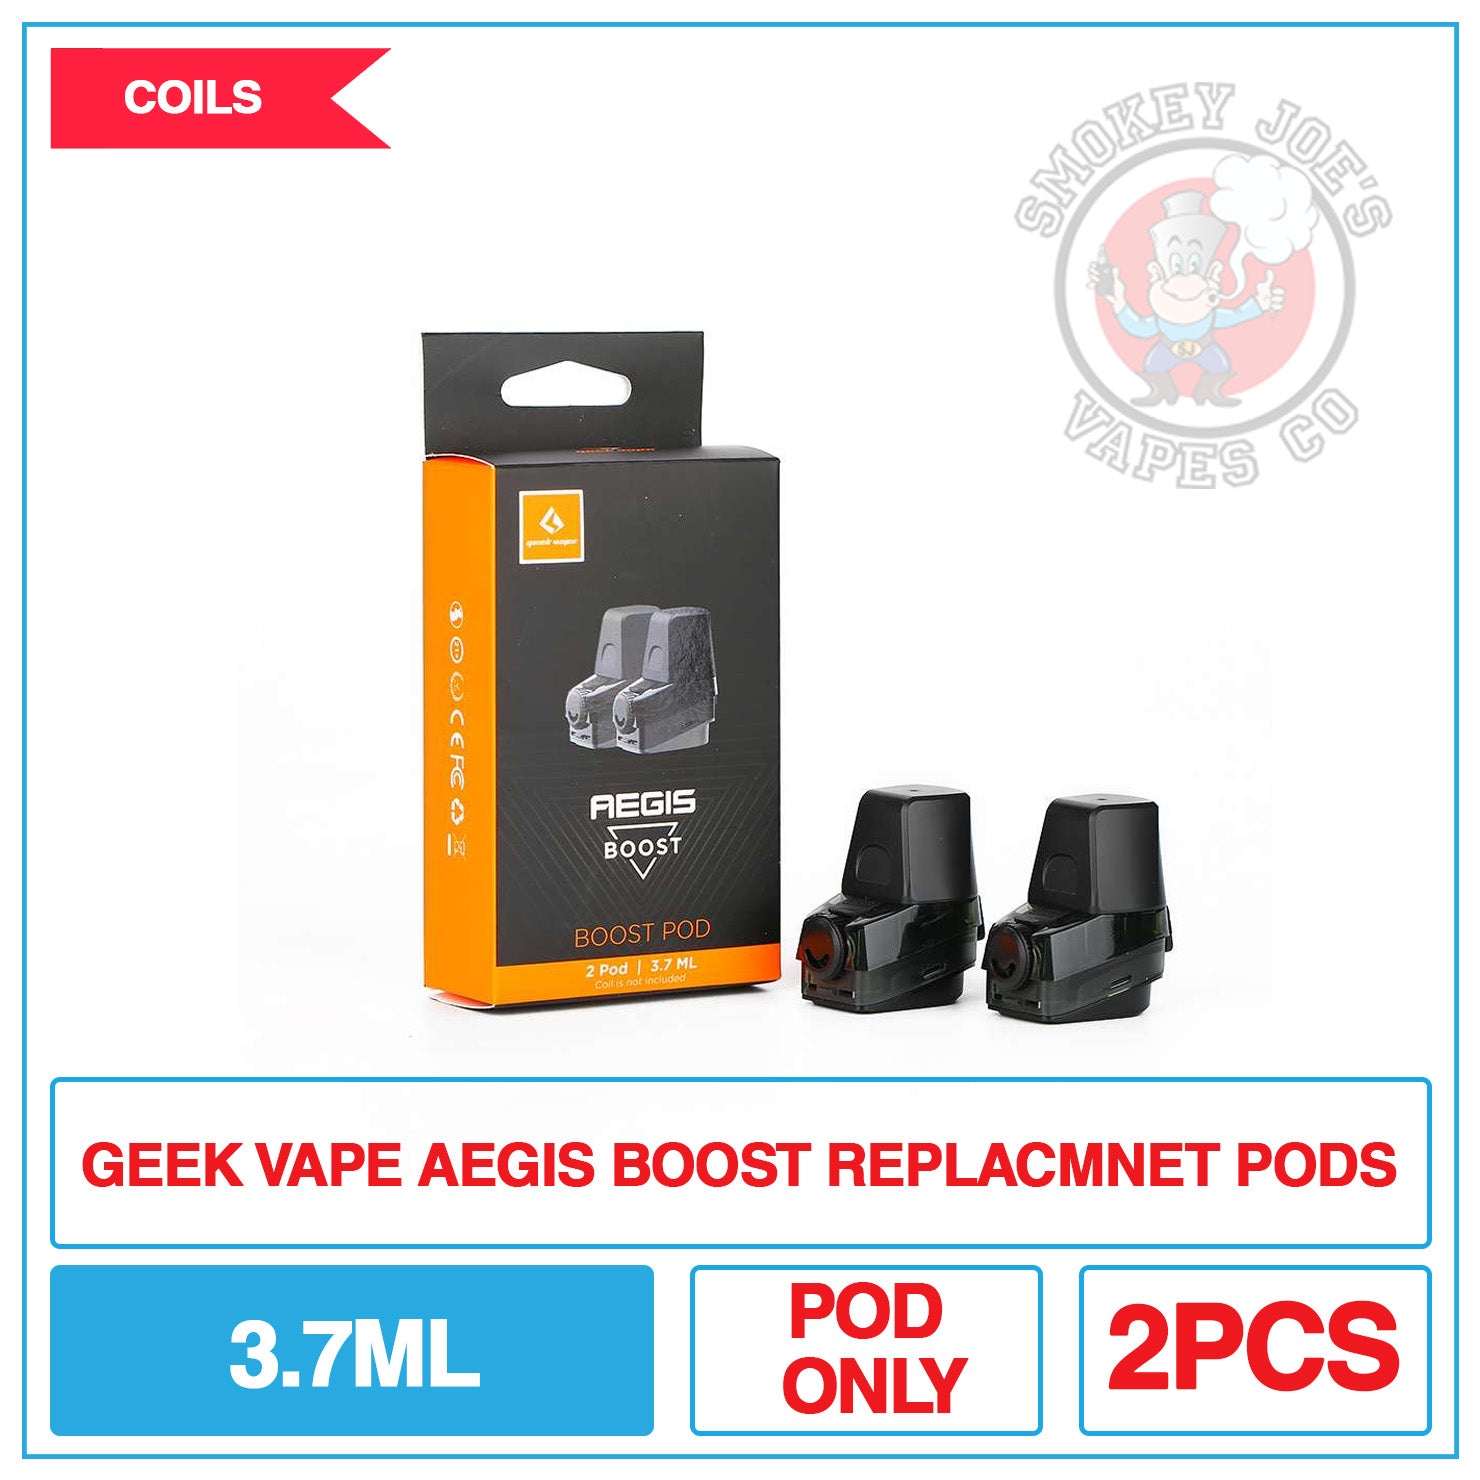 Aegis Boost Replacement Pods | Smokey Joes Vapes Co